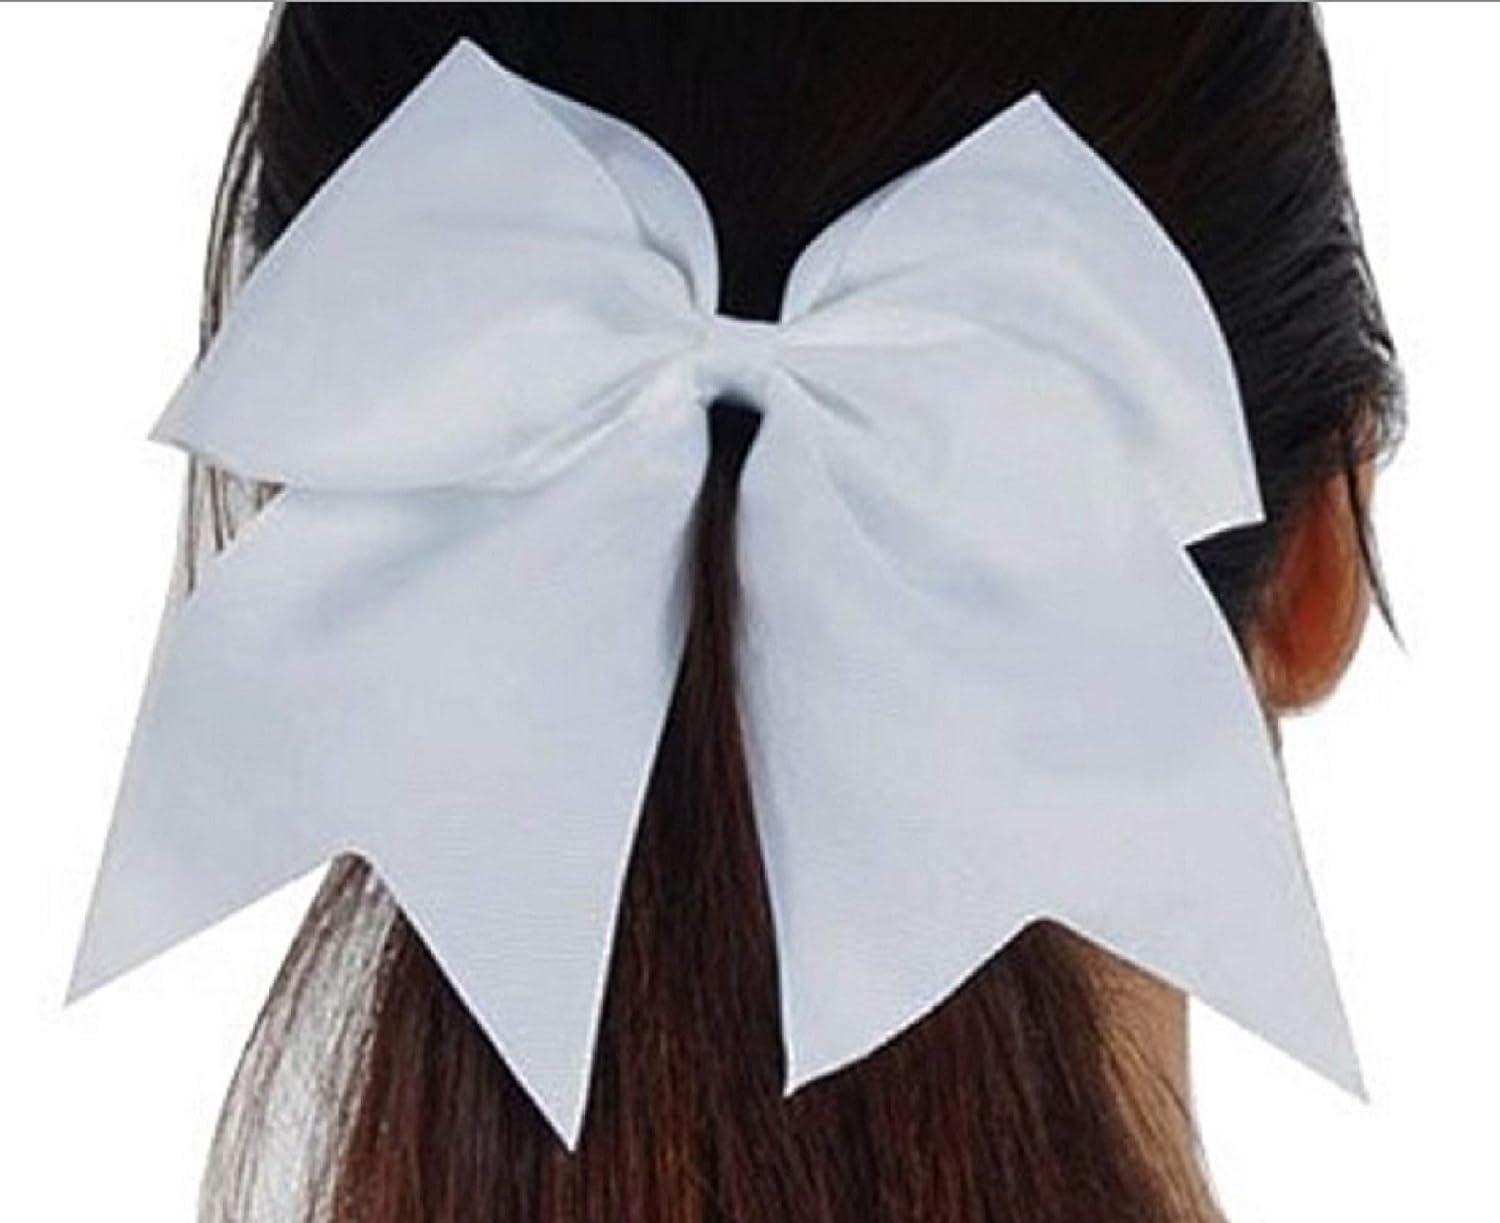 Glitter Cheer Bows - Cheerleading Softball Gifts for Girls and Women Team  Bow with Ponytail Holder Complete your Cheerleader Outfit Uniform Strong  Hair Ties Bands Elastics by (1) (Silver) 